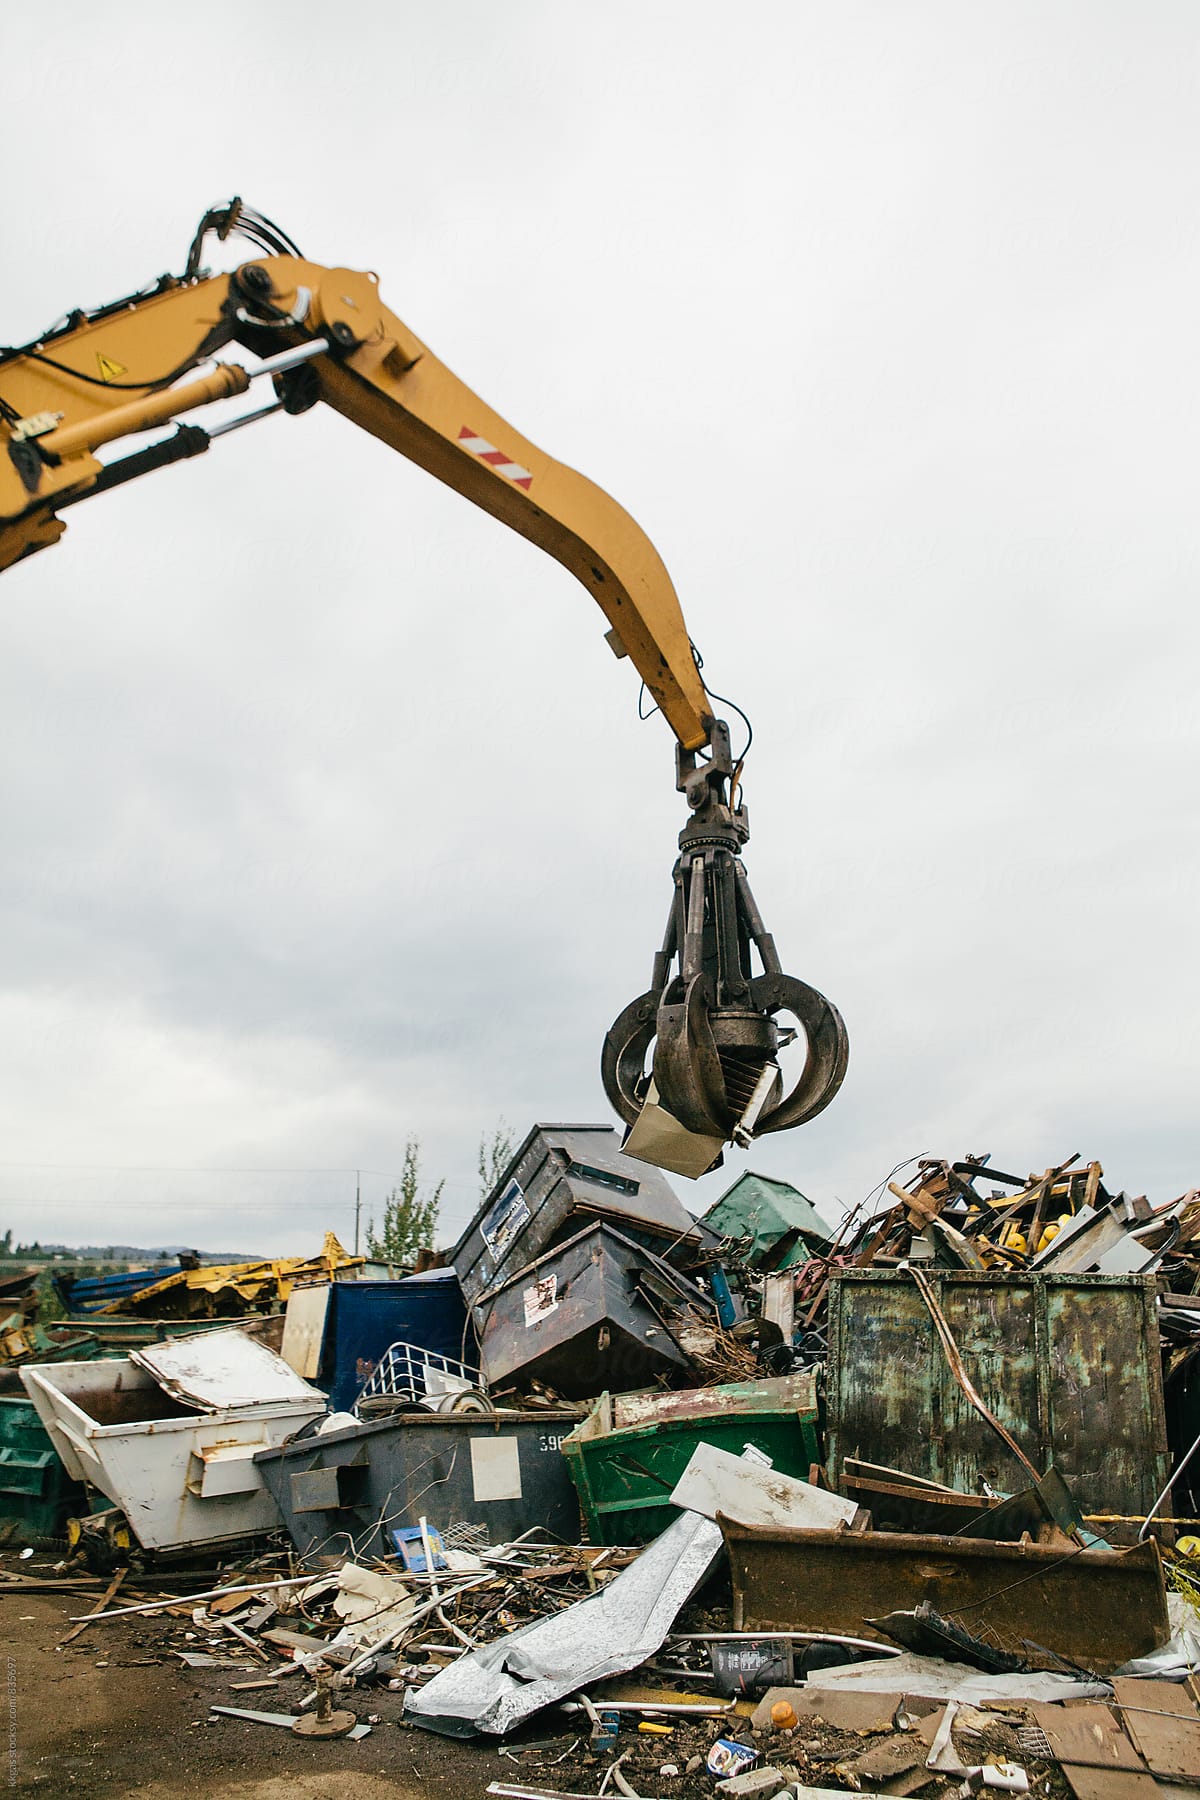 Excavator sorting out metal for recycling at a recycling centre